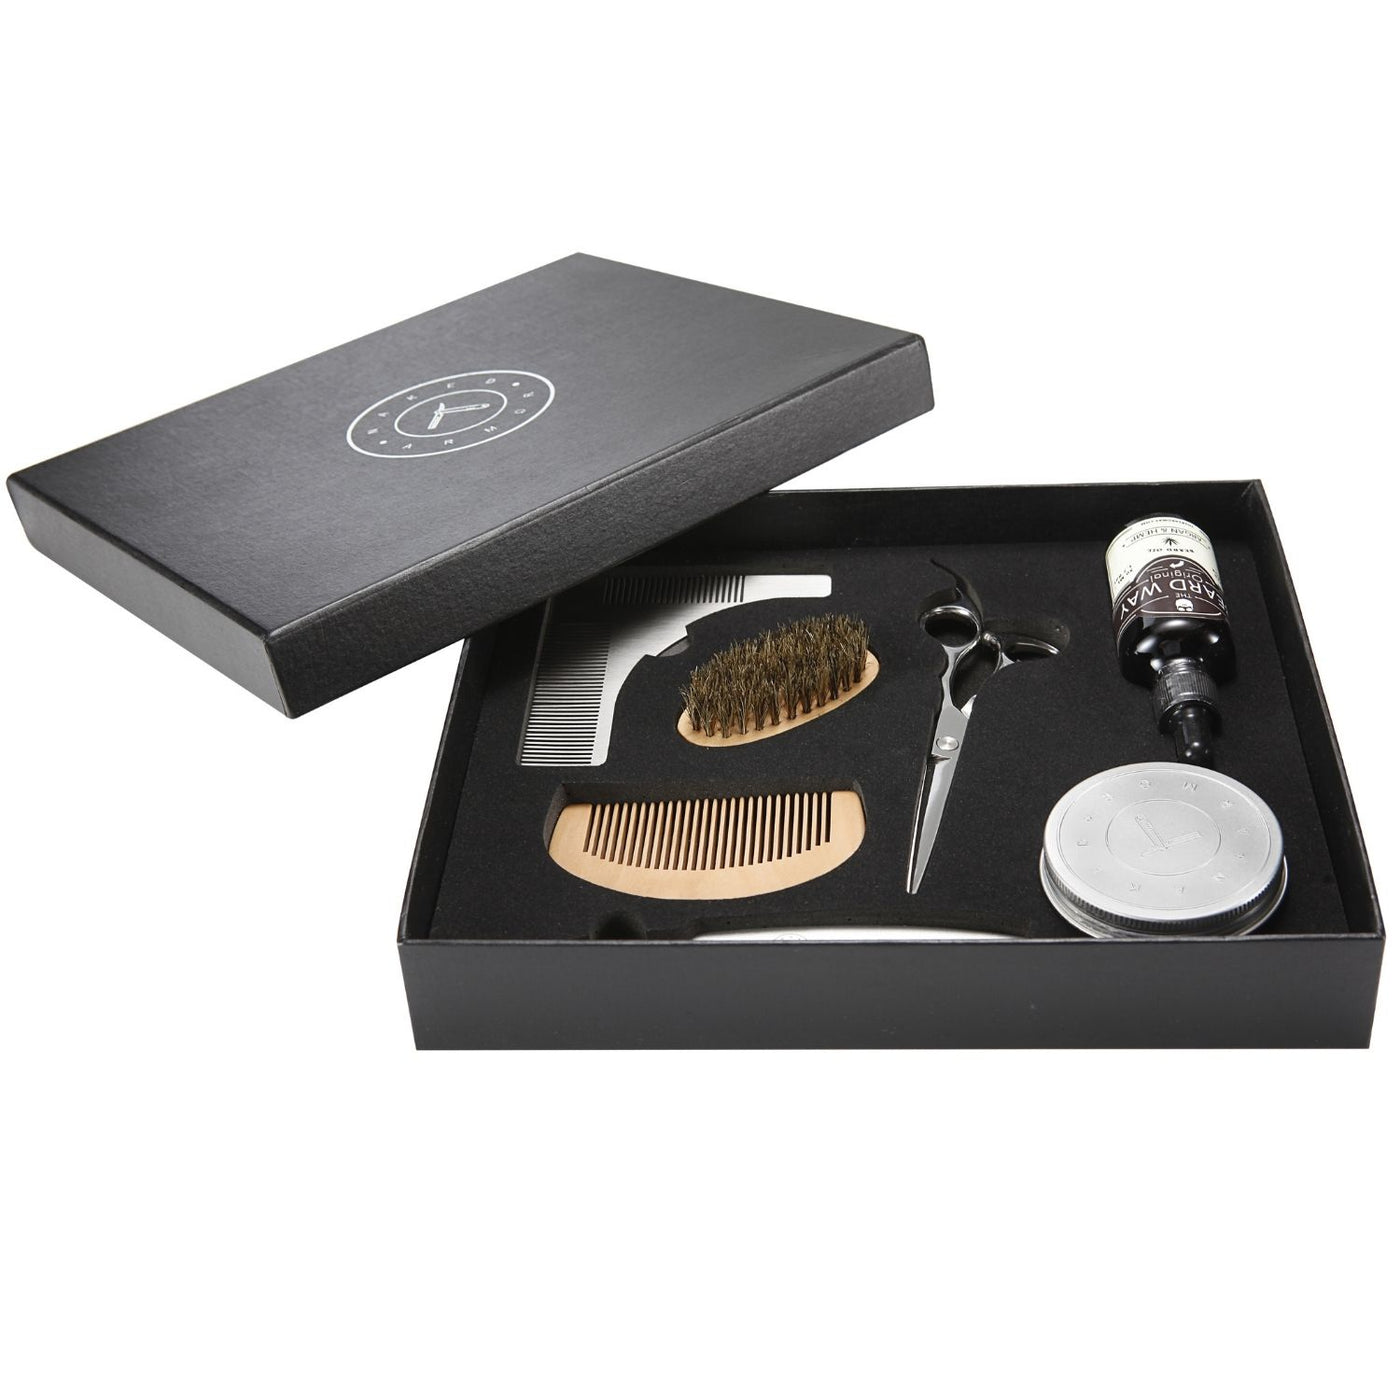  Grizzly Beard Kit by Naked Armor sold by Naked Armor Razors